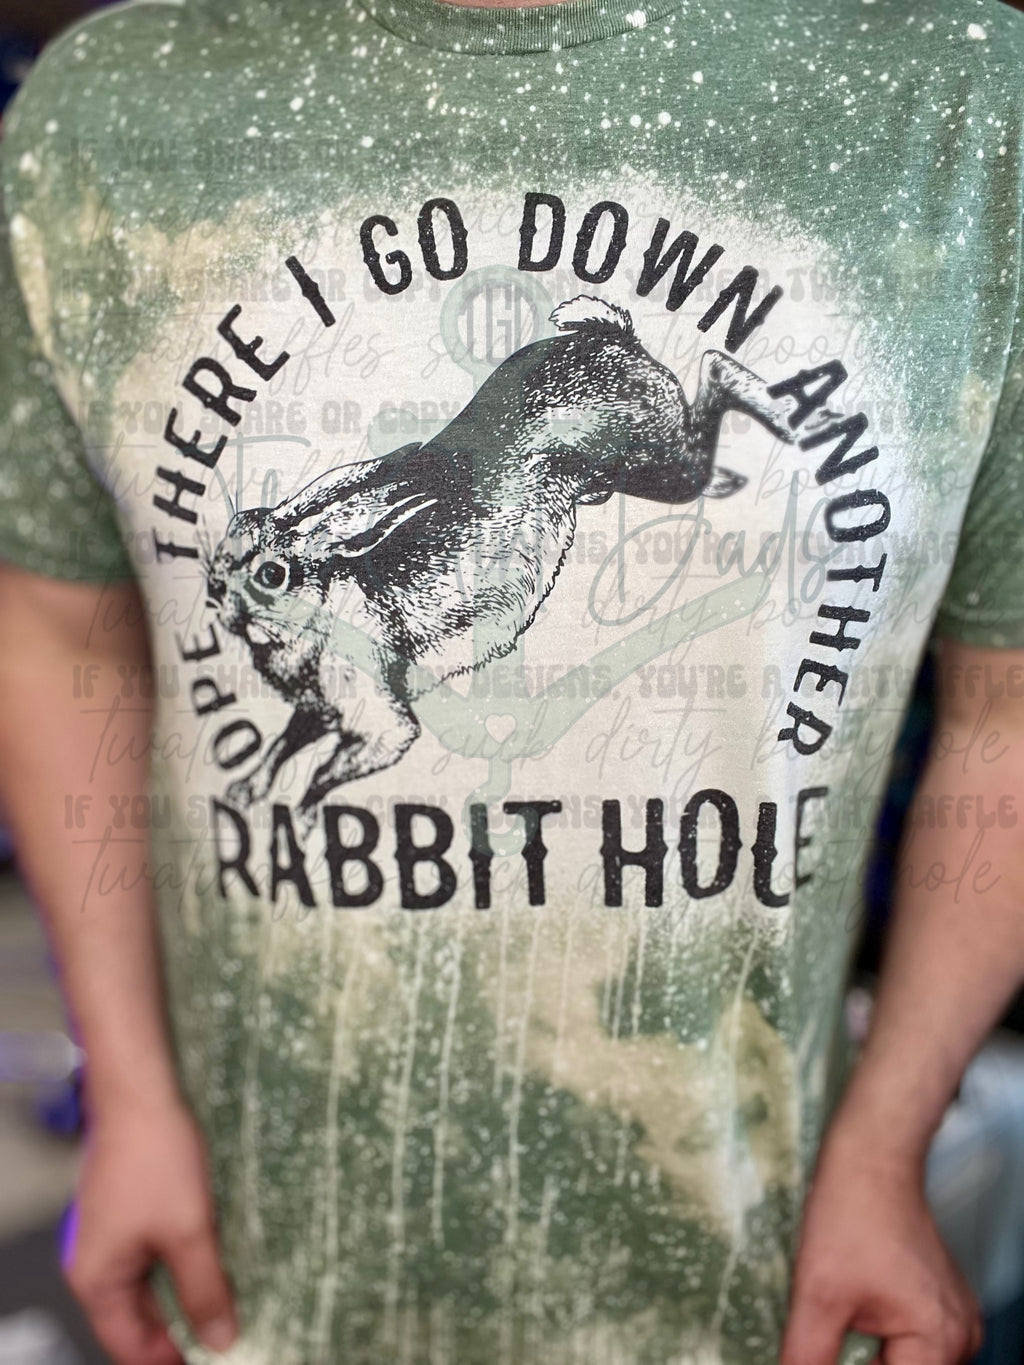 Ope There I Go Down Another Rabbit Hole Top Design